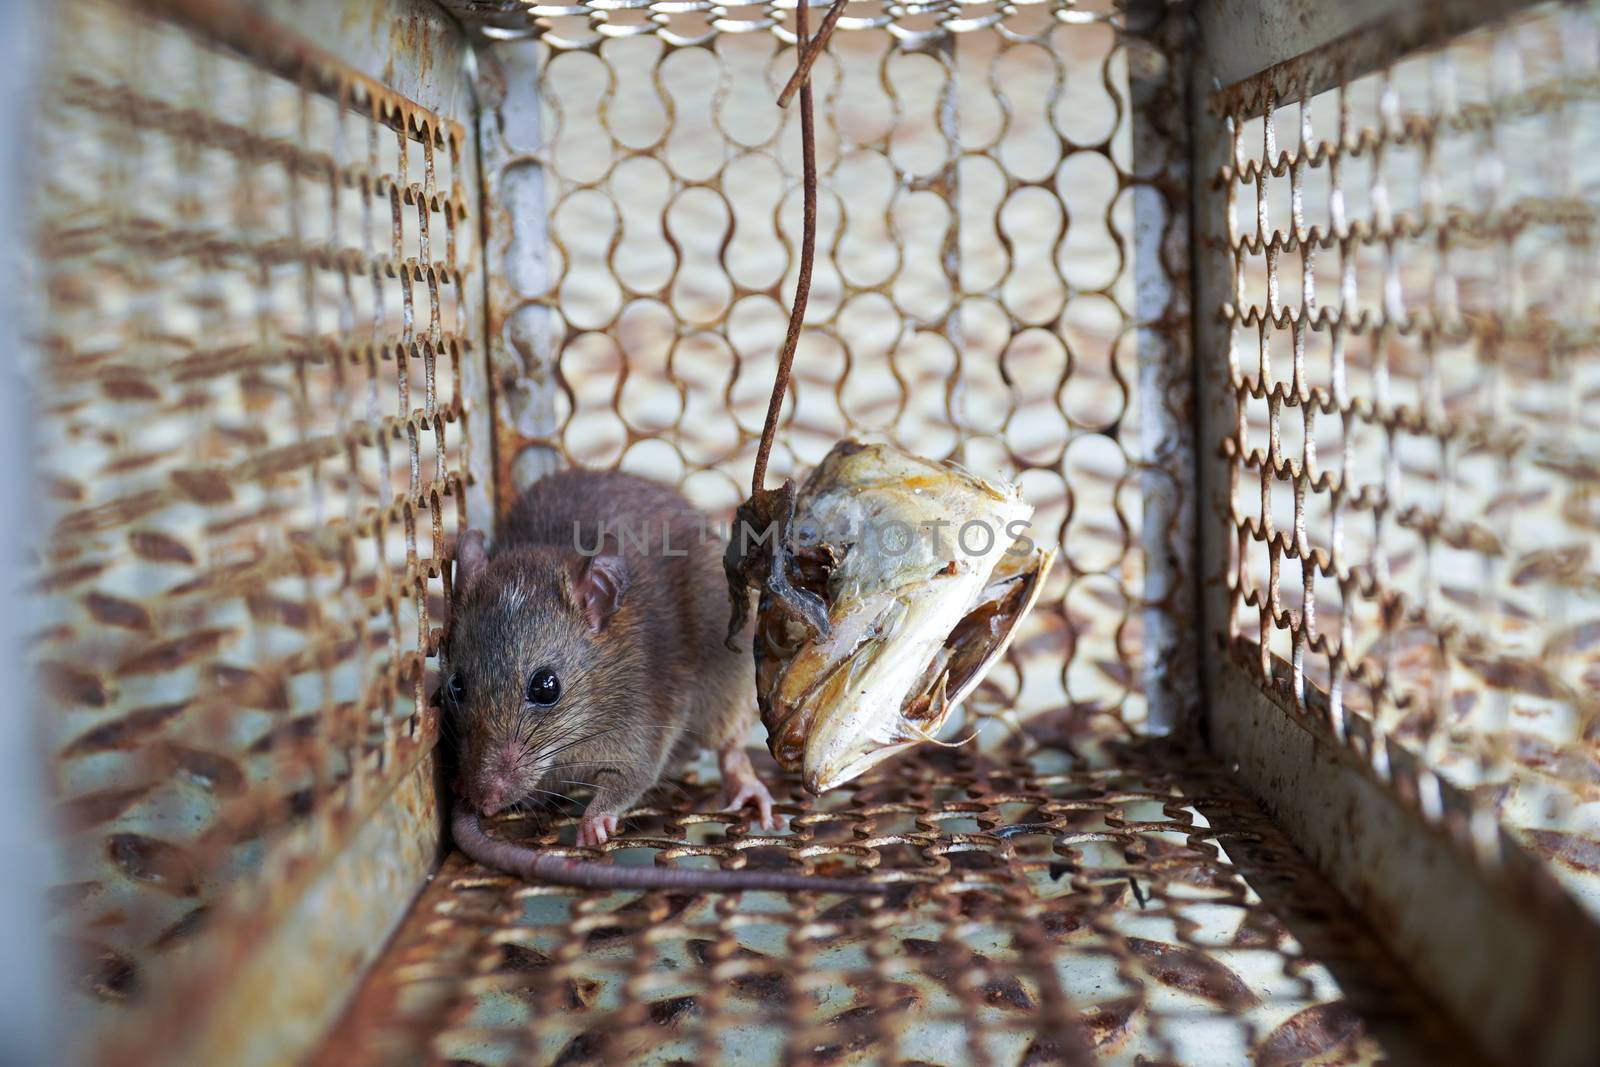 Close-up of a rat trapped in a mousetrap cage, Rodent control cage in house.